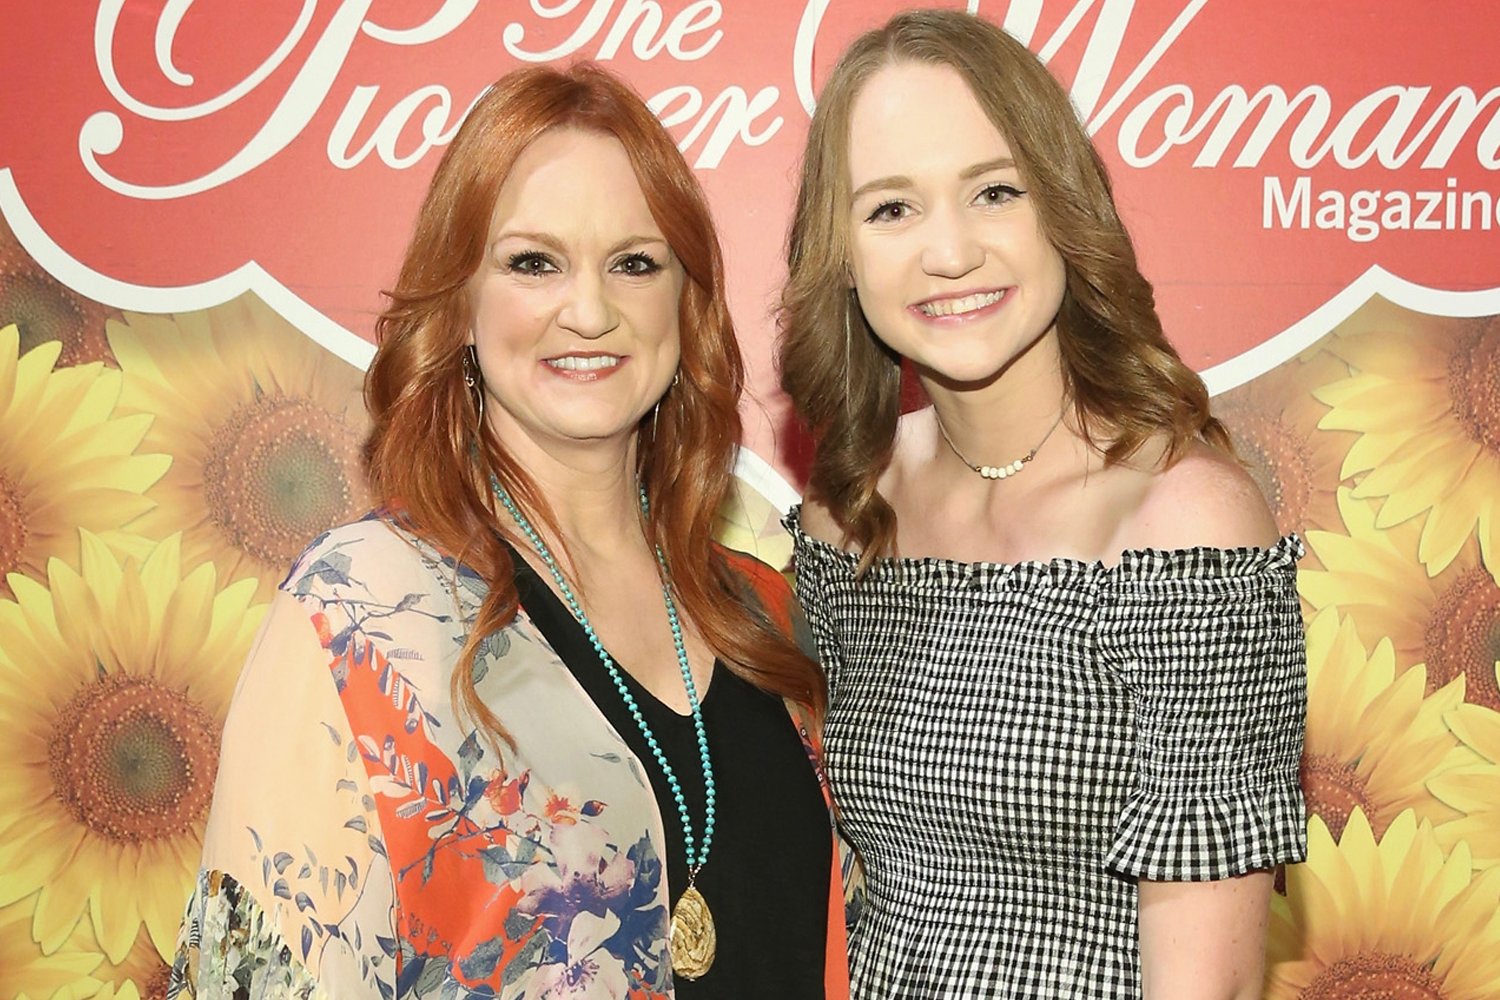 'The Pioneer Woman' Star Ree Drummond and daughter Paige posing together at a book signing